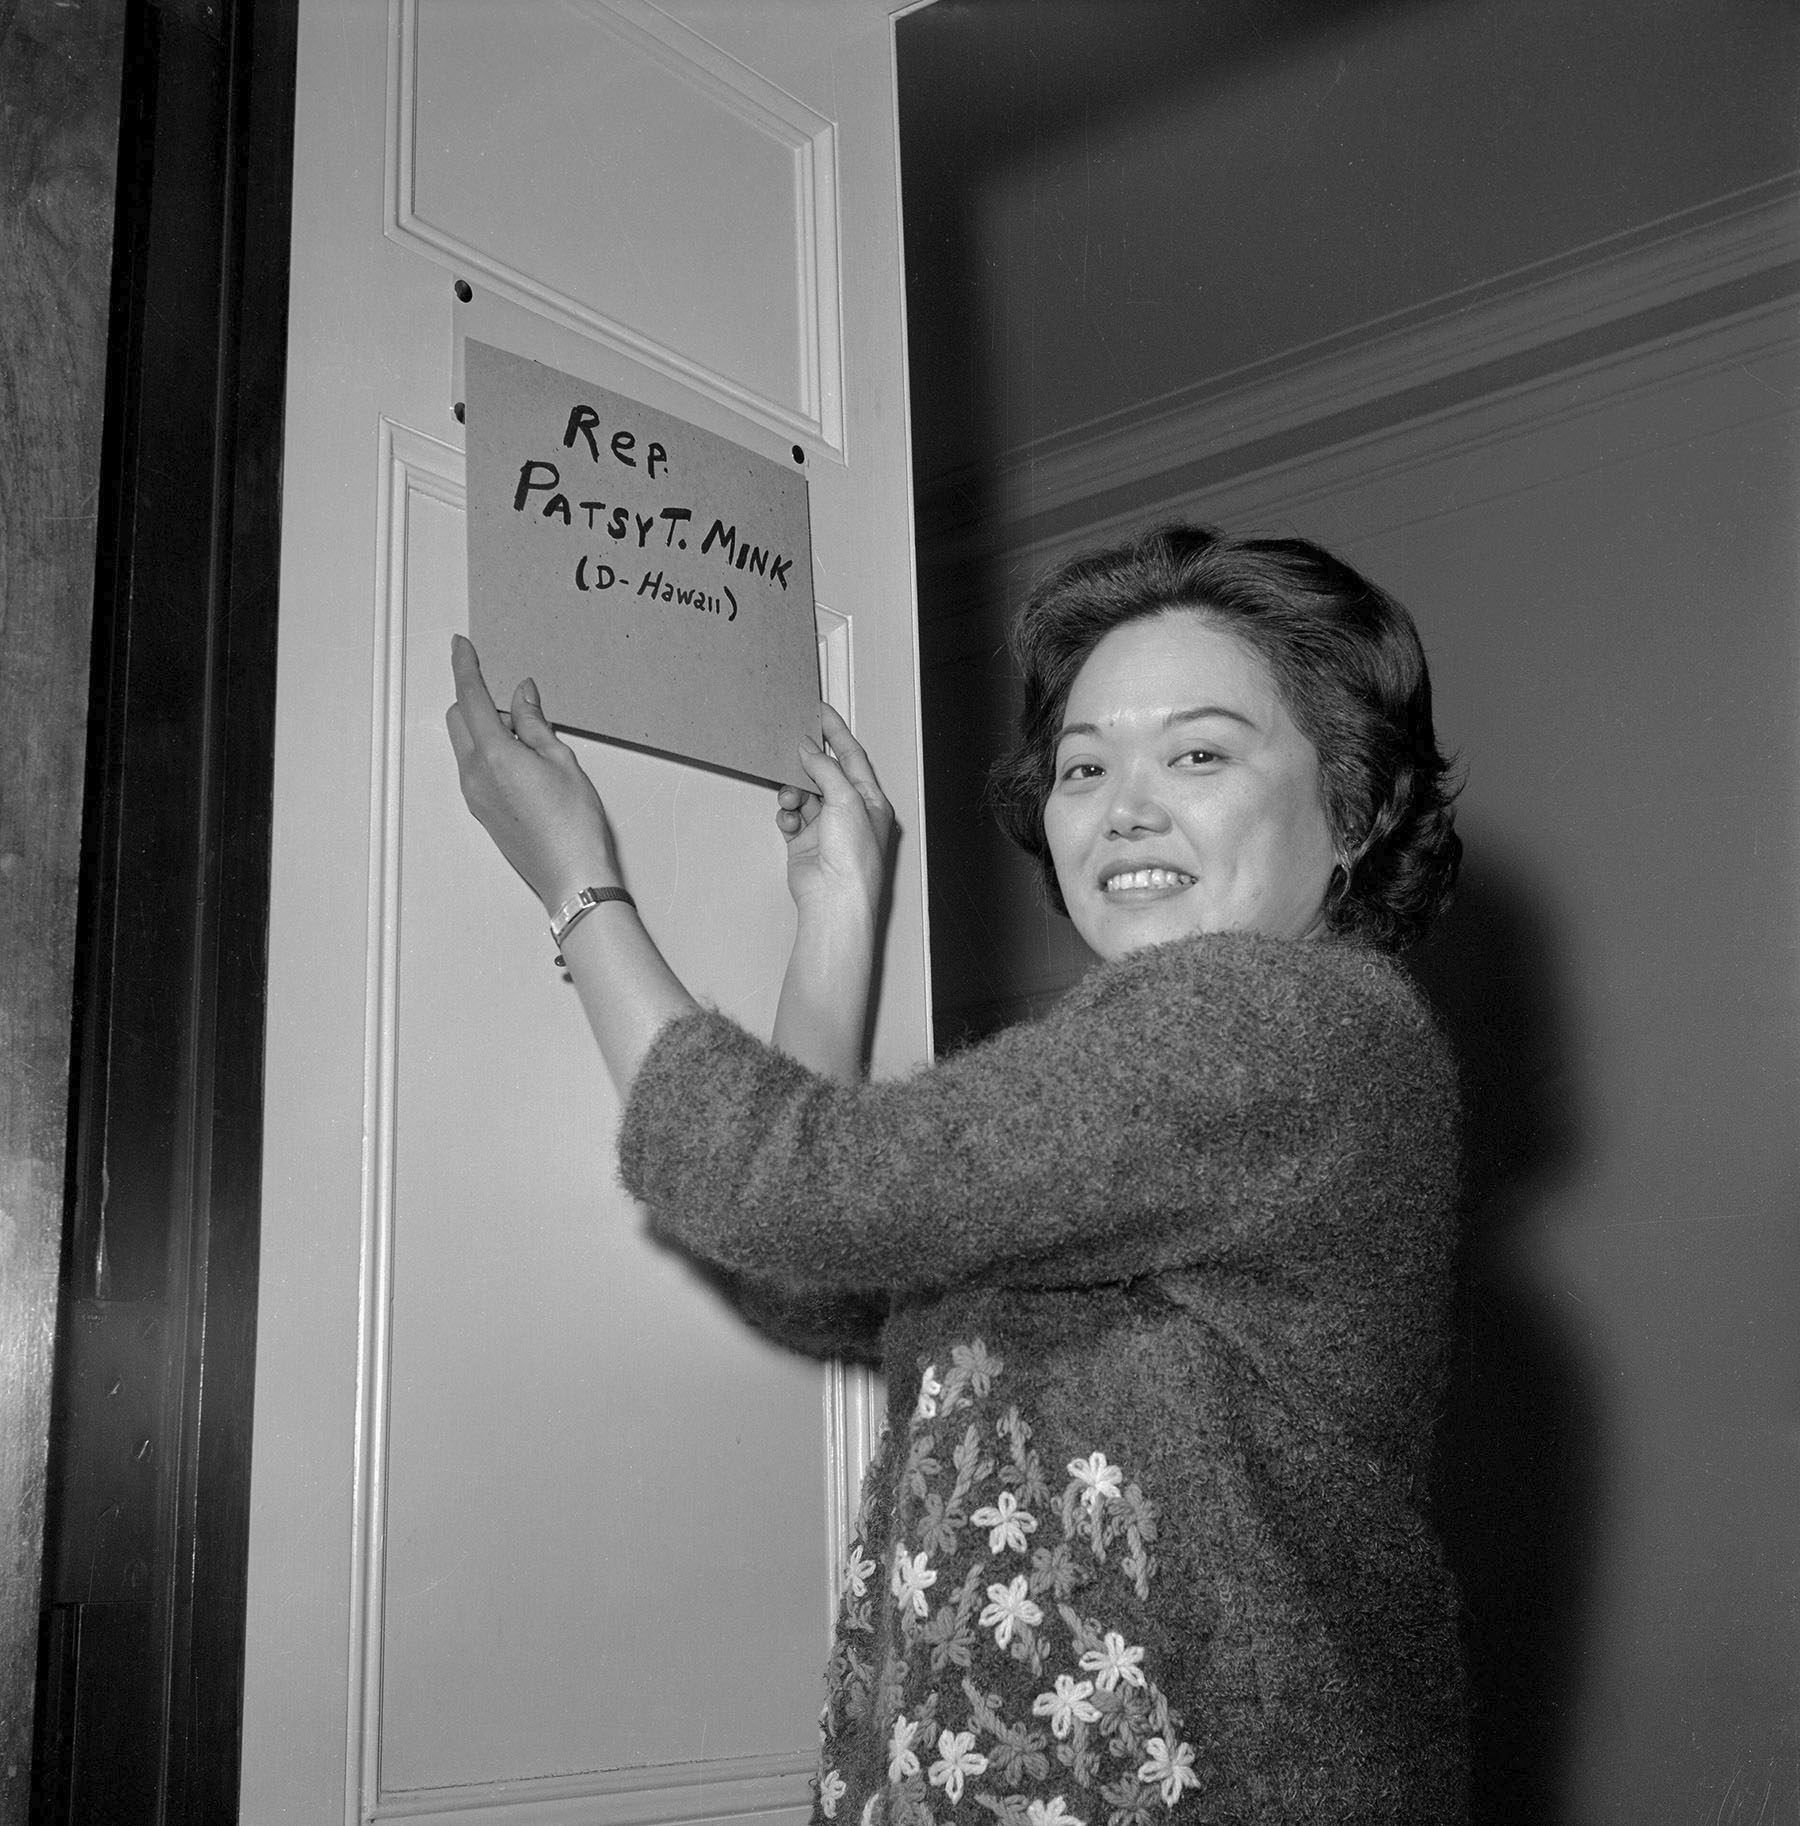 Rep. Patsy Mink holds a homemade plate that reads 